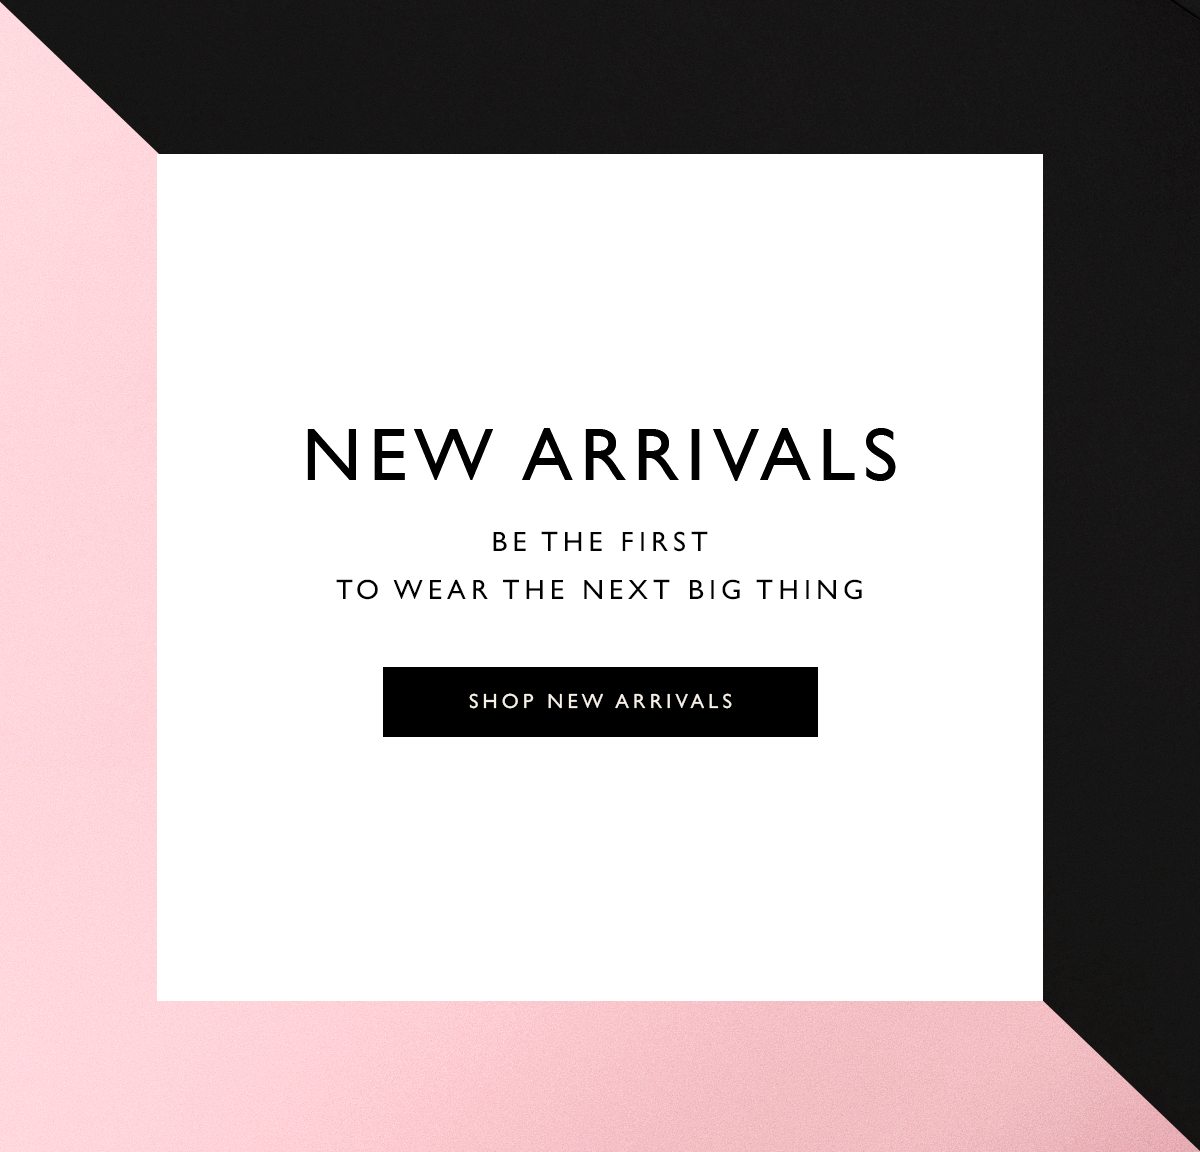  New Arrivals. Be the first to wear the next big thing. SHOP NEW ARRIVALS